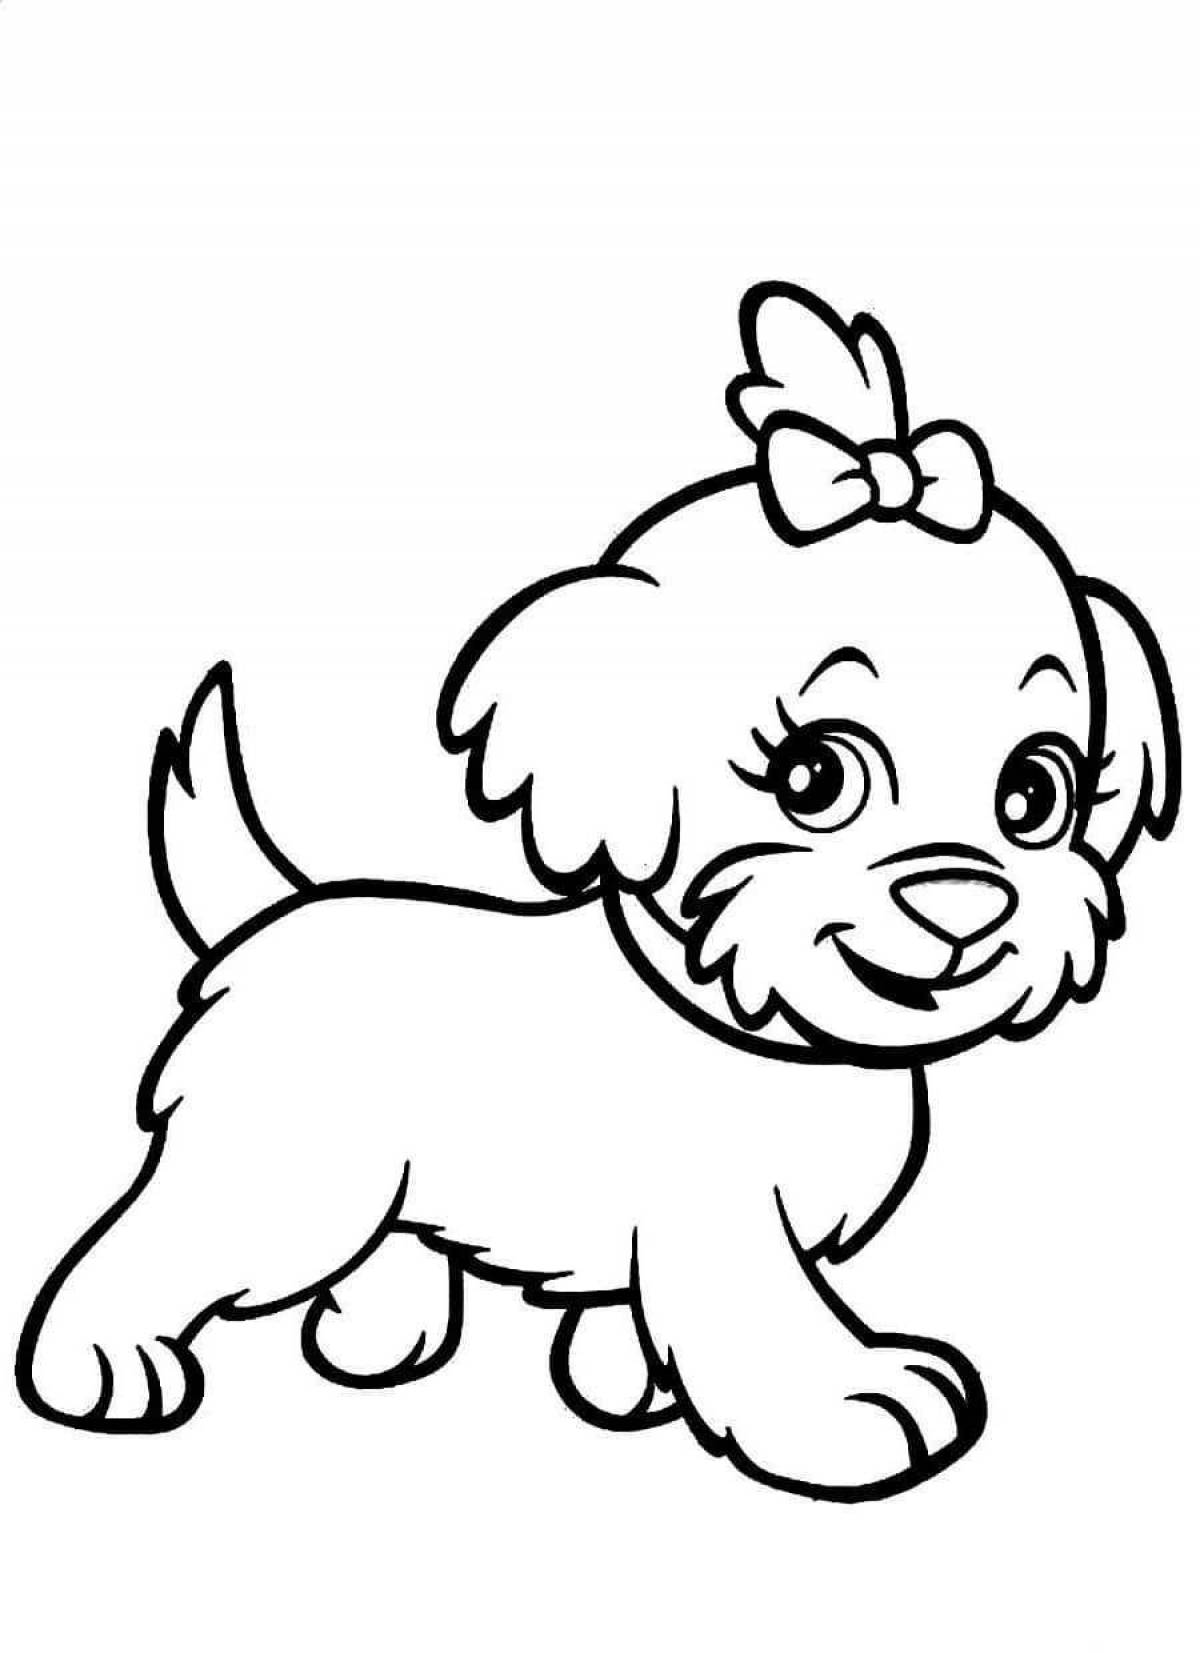 Cute dog coloring